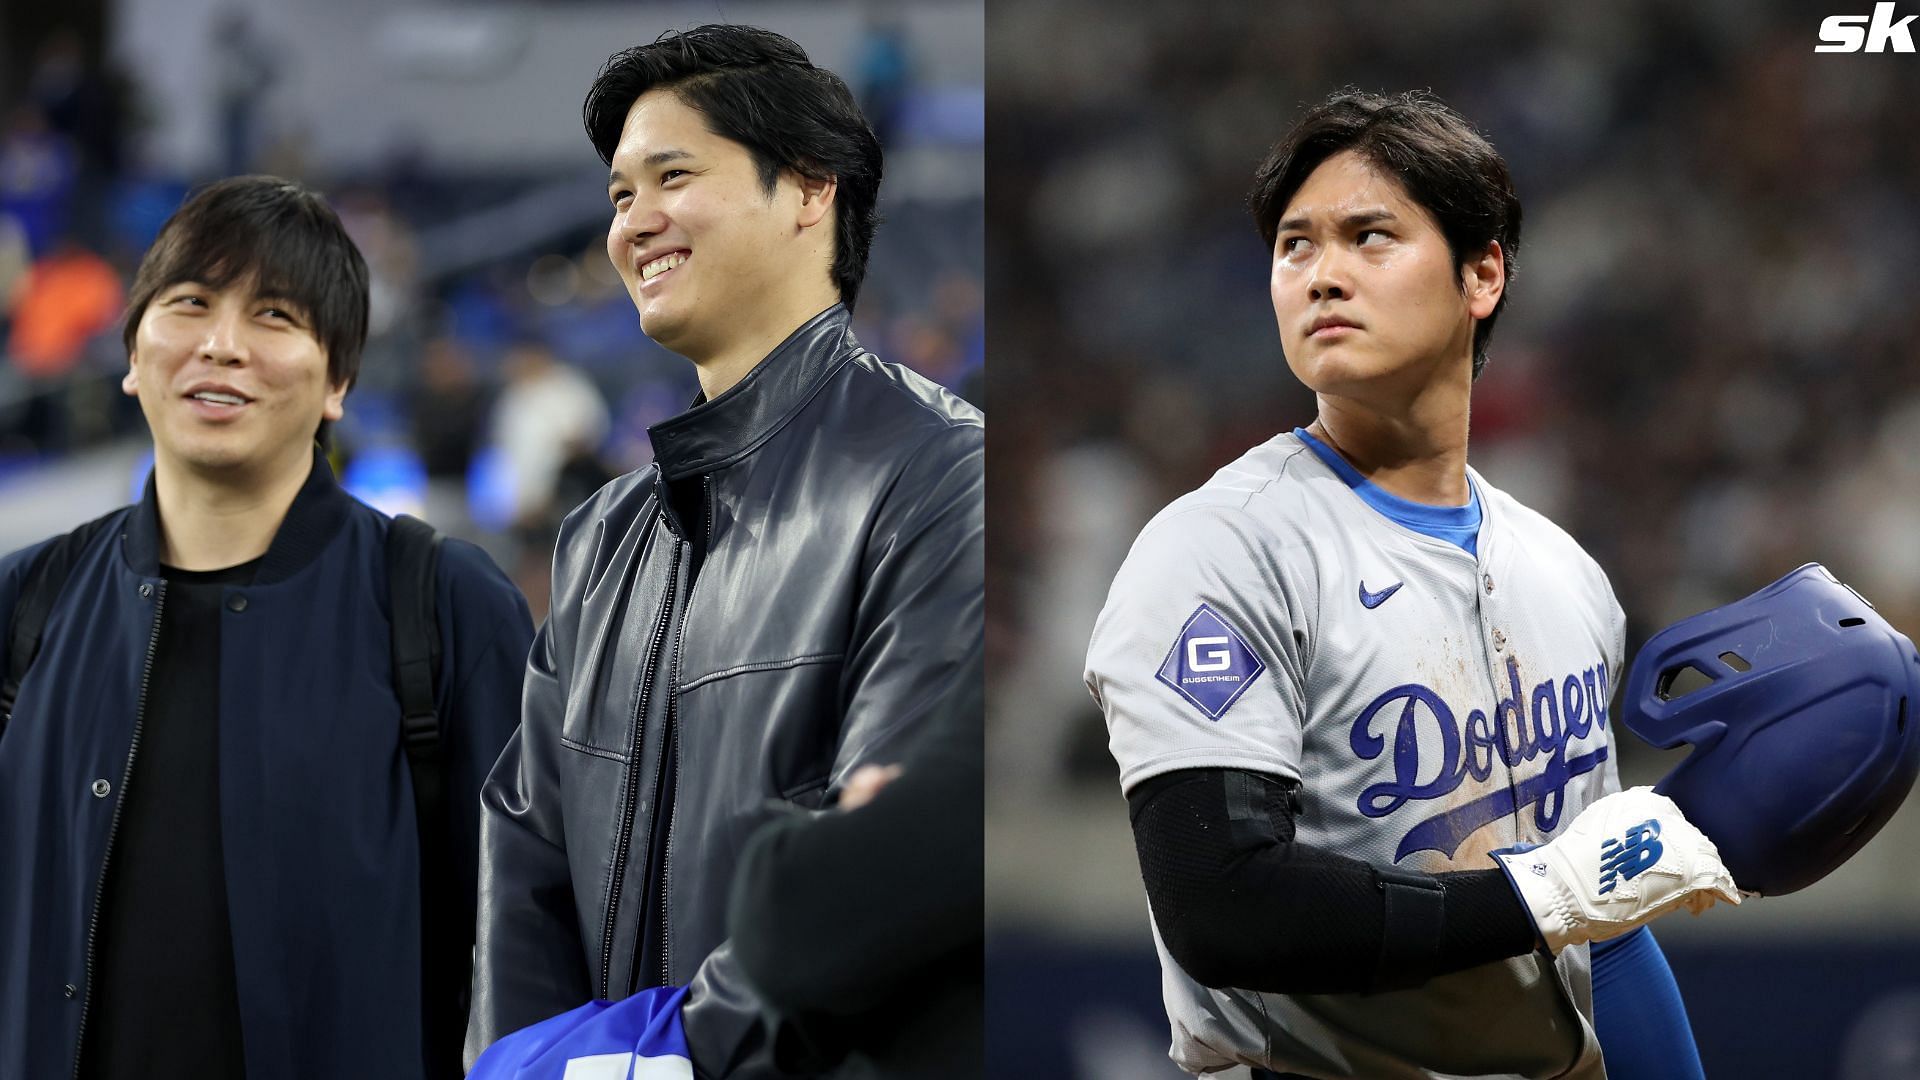 Shohei Ohtani of the Los Angeles Dodgers talks with his interpreter Ippei Mizuhara prior to the game between the New Orleans Saints and the Los Angeles Rams at SoFi Stadium